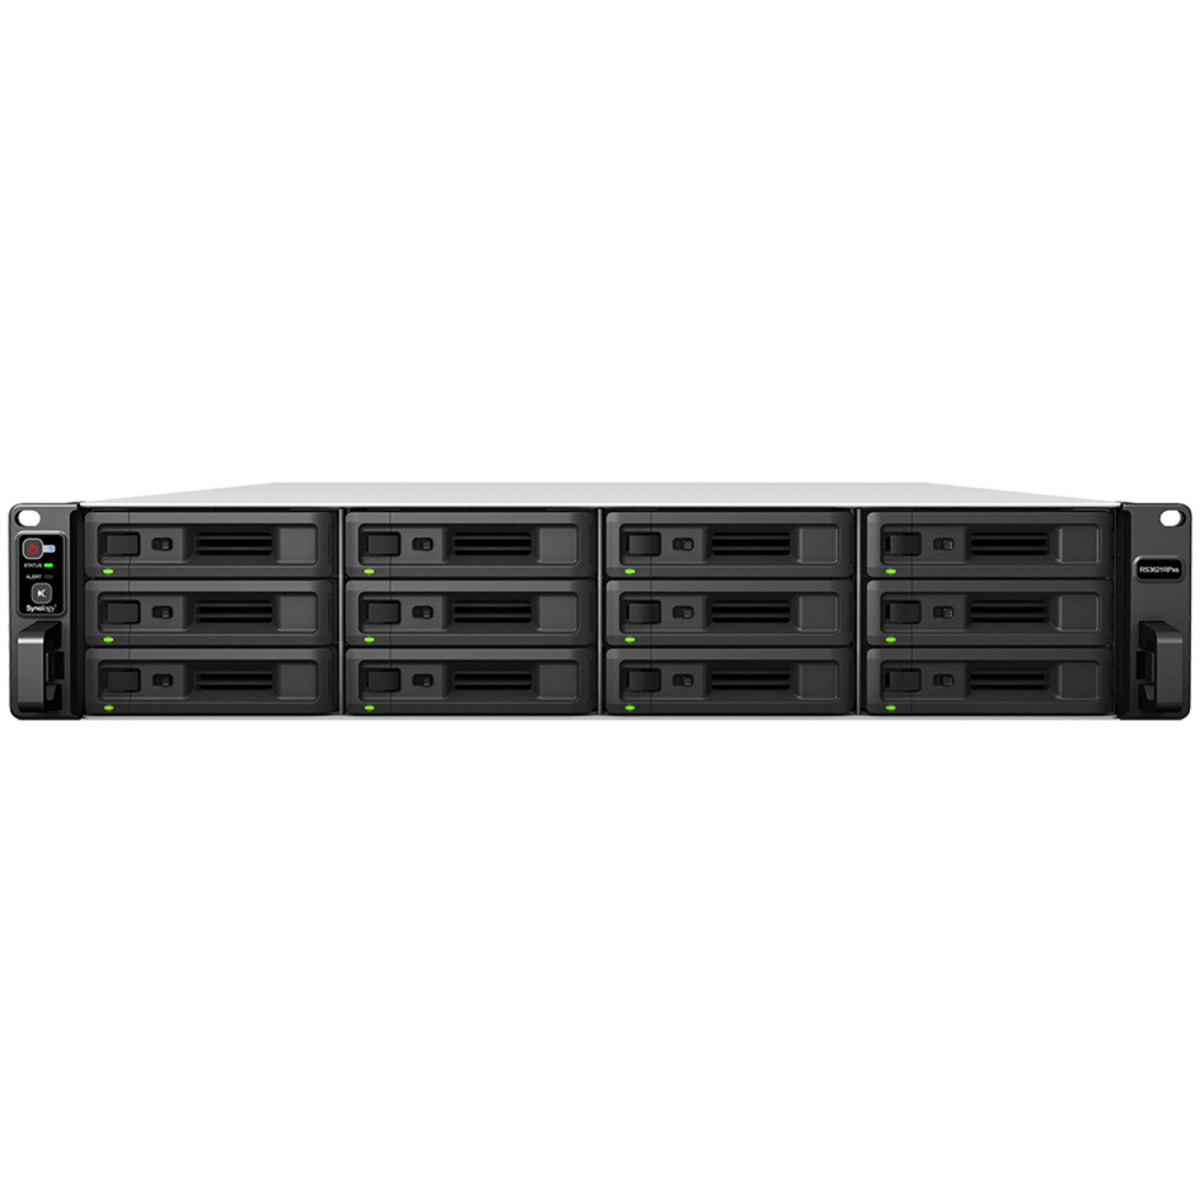 buy $5313 Synology RackStation RS3621RPxs 12tb RackMount NAS - Network Attached Storage Device 12x1000gb Samsung 870 QVO MZ-77Q1T0 2.5 SATA 6Gb/s SSD CONSUMER Class Drives Installed - Burn-In Tested - nas headquarters buy network attached storage server device das new raid-5 free shipping usa RackStation RS3621RPxs